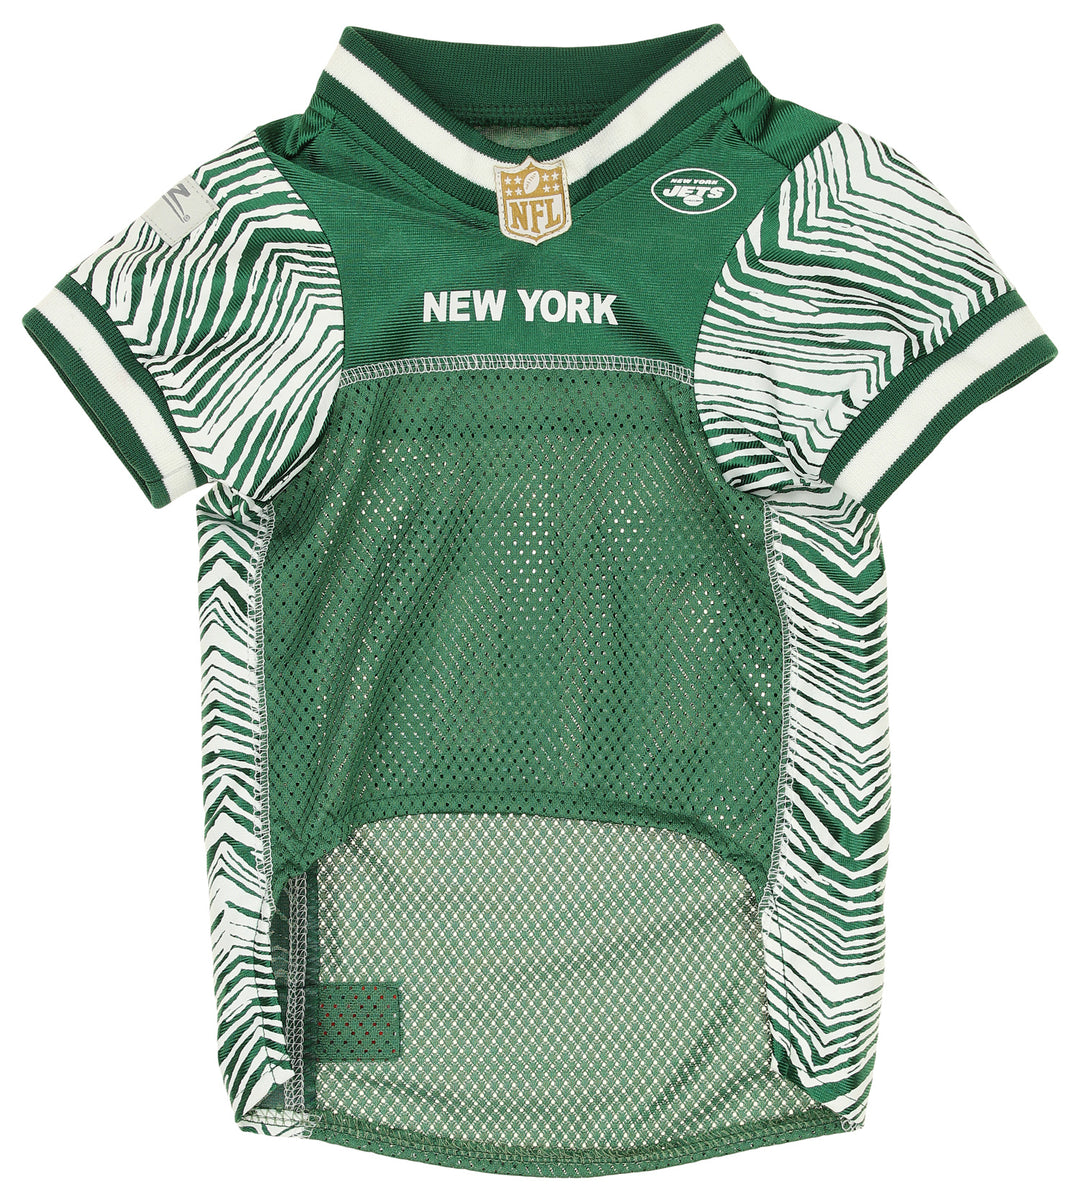 Zubaz X Pets First NFL New York Jets Jersey For Dogs & Cats, Large